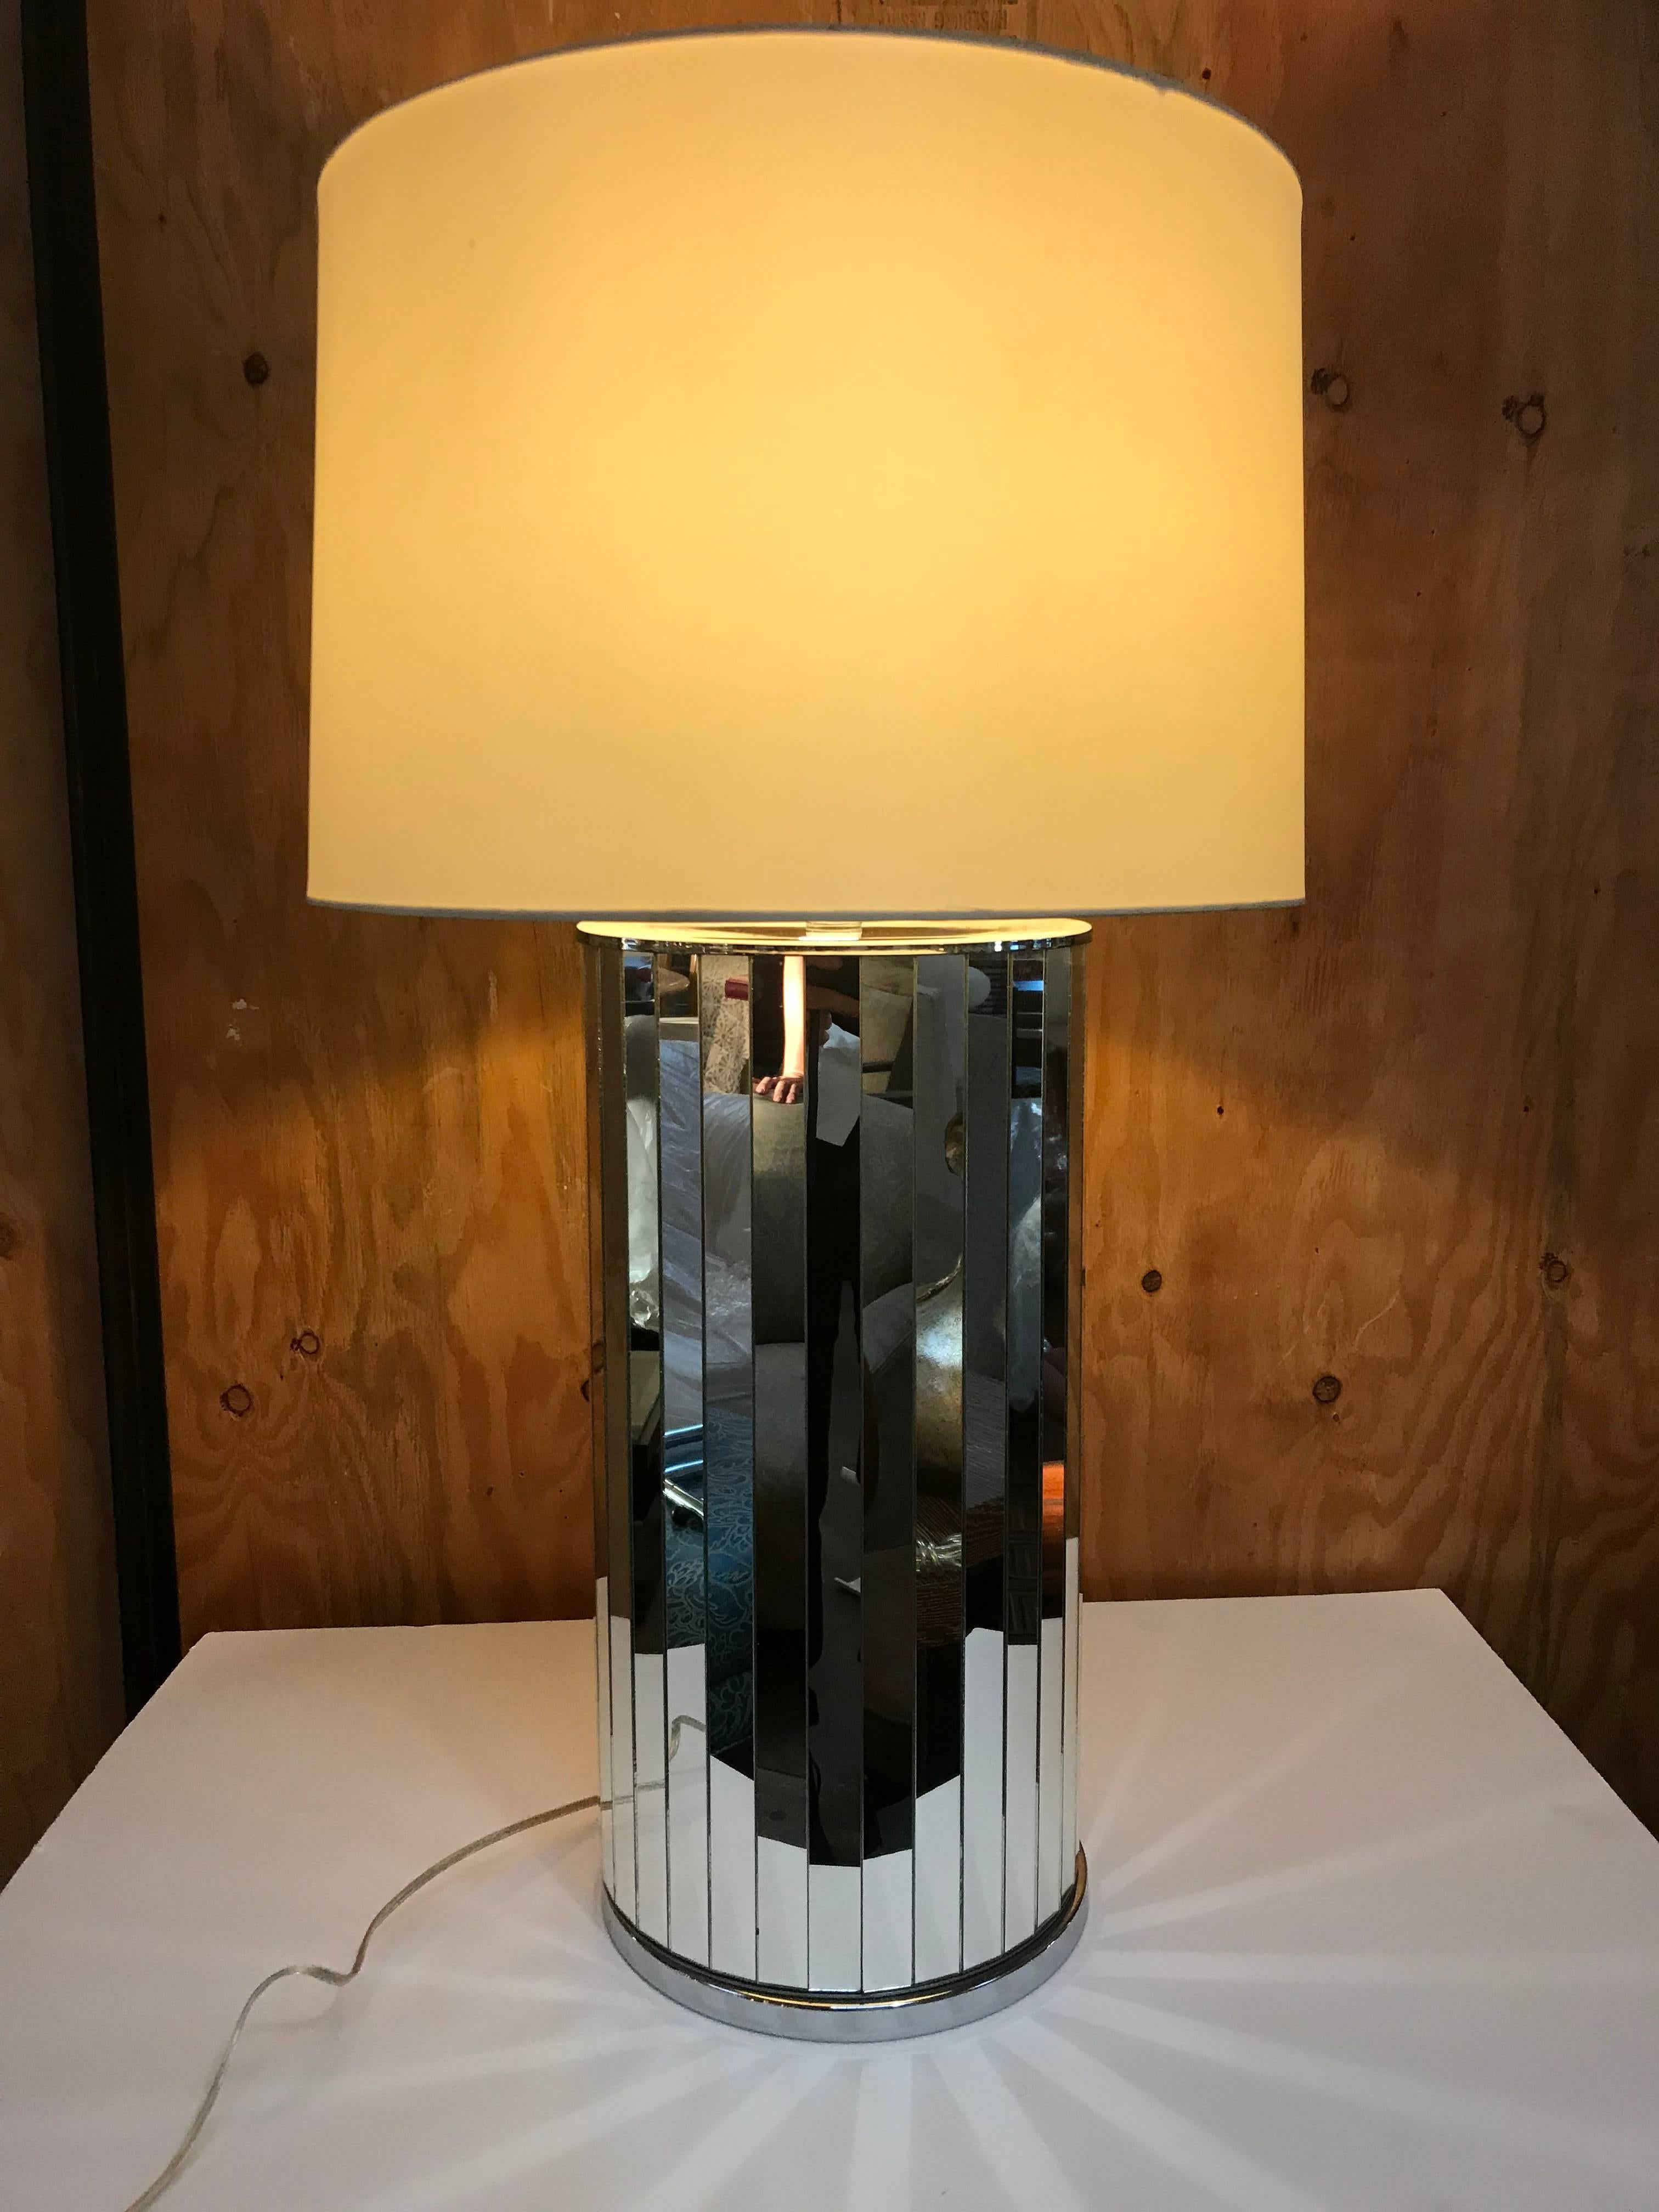 Glamorous 1970s table lamp with vertical mirrored panels around a column body with chromed top and bottom.
Wired and in working condition. Use 100W max bulbs. Original paper shade measures 12.5